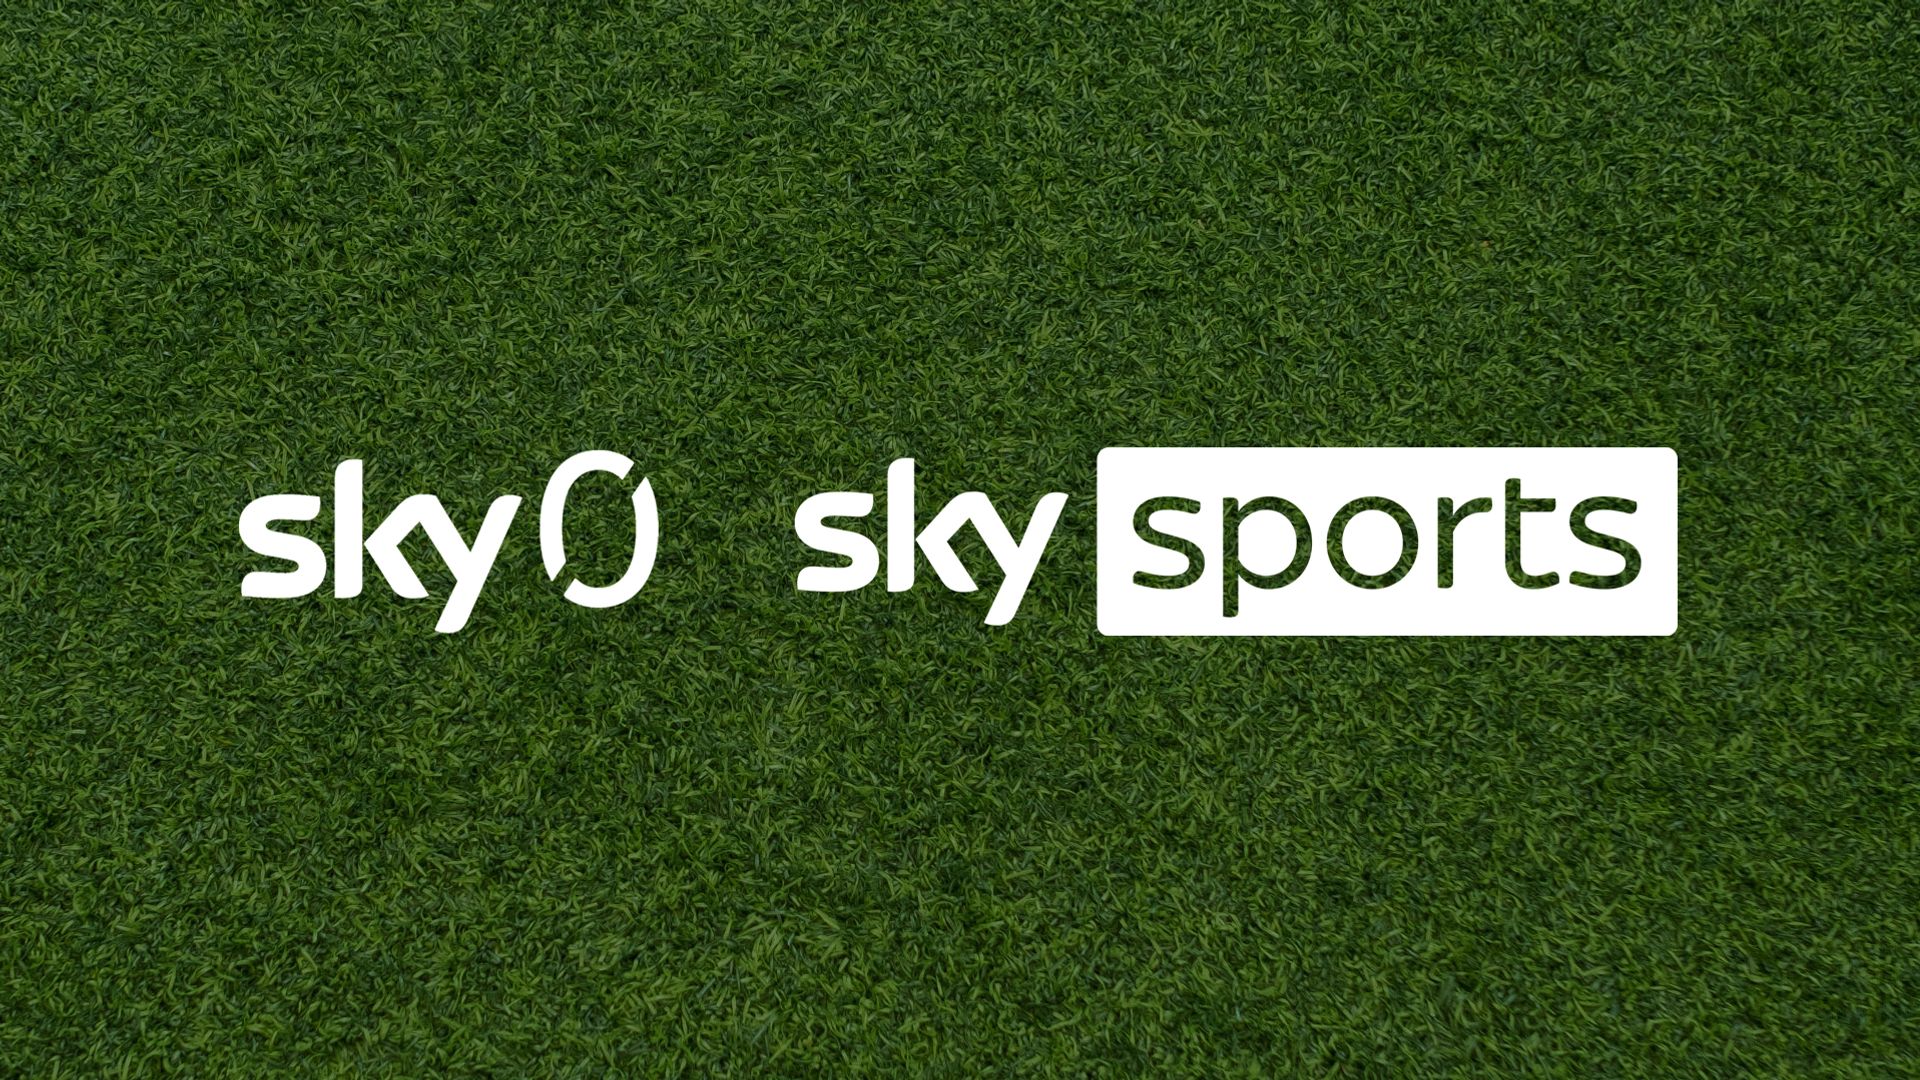 Sky Zero & Sky Sports: Help us look after the sports we love